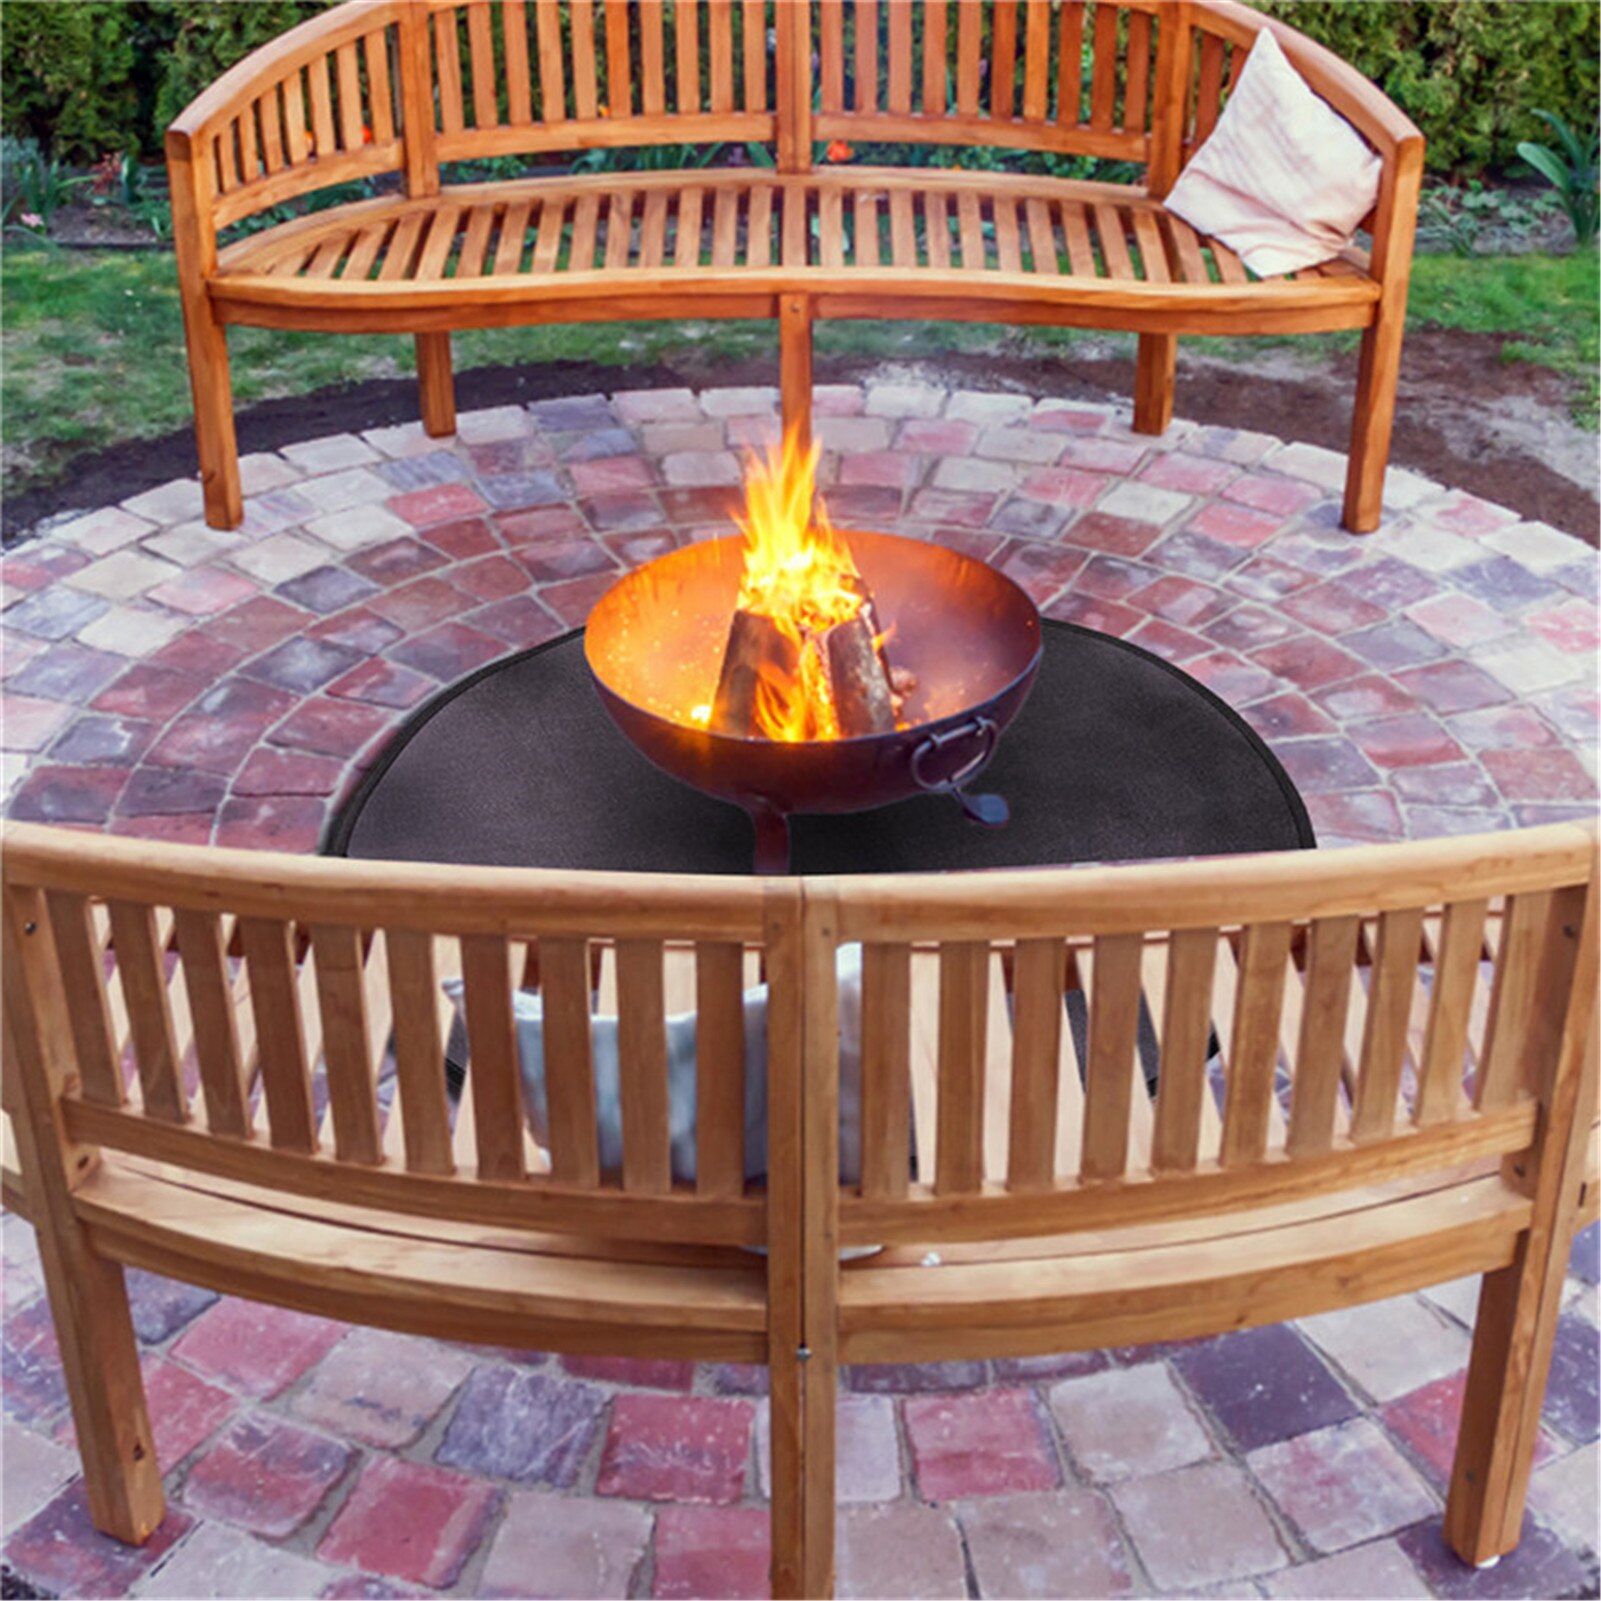 24/32/36 Inch Fire Pit Mat Excellent Fire Resistance Fire Resistant Fire Pad Patio And Deck Protector Survival Emergency Mat